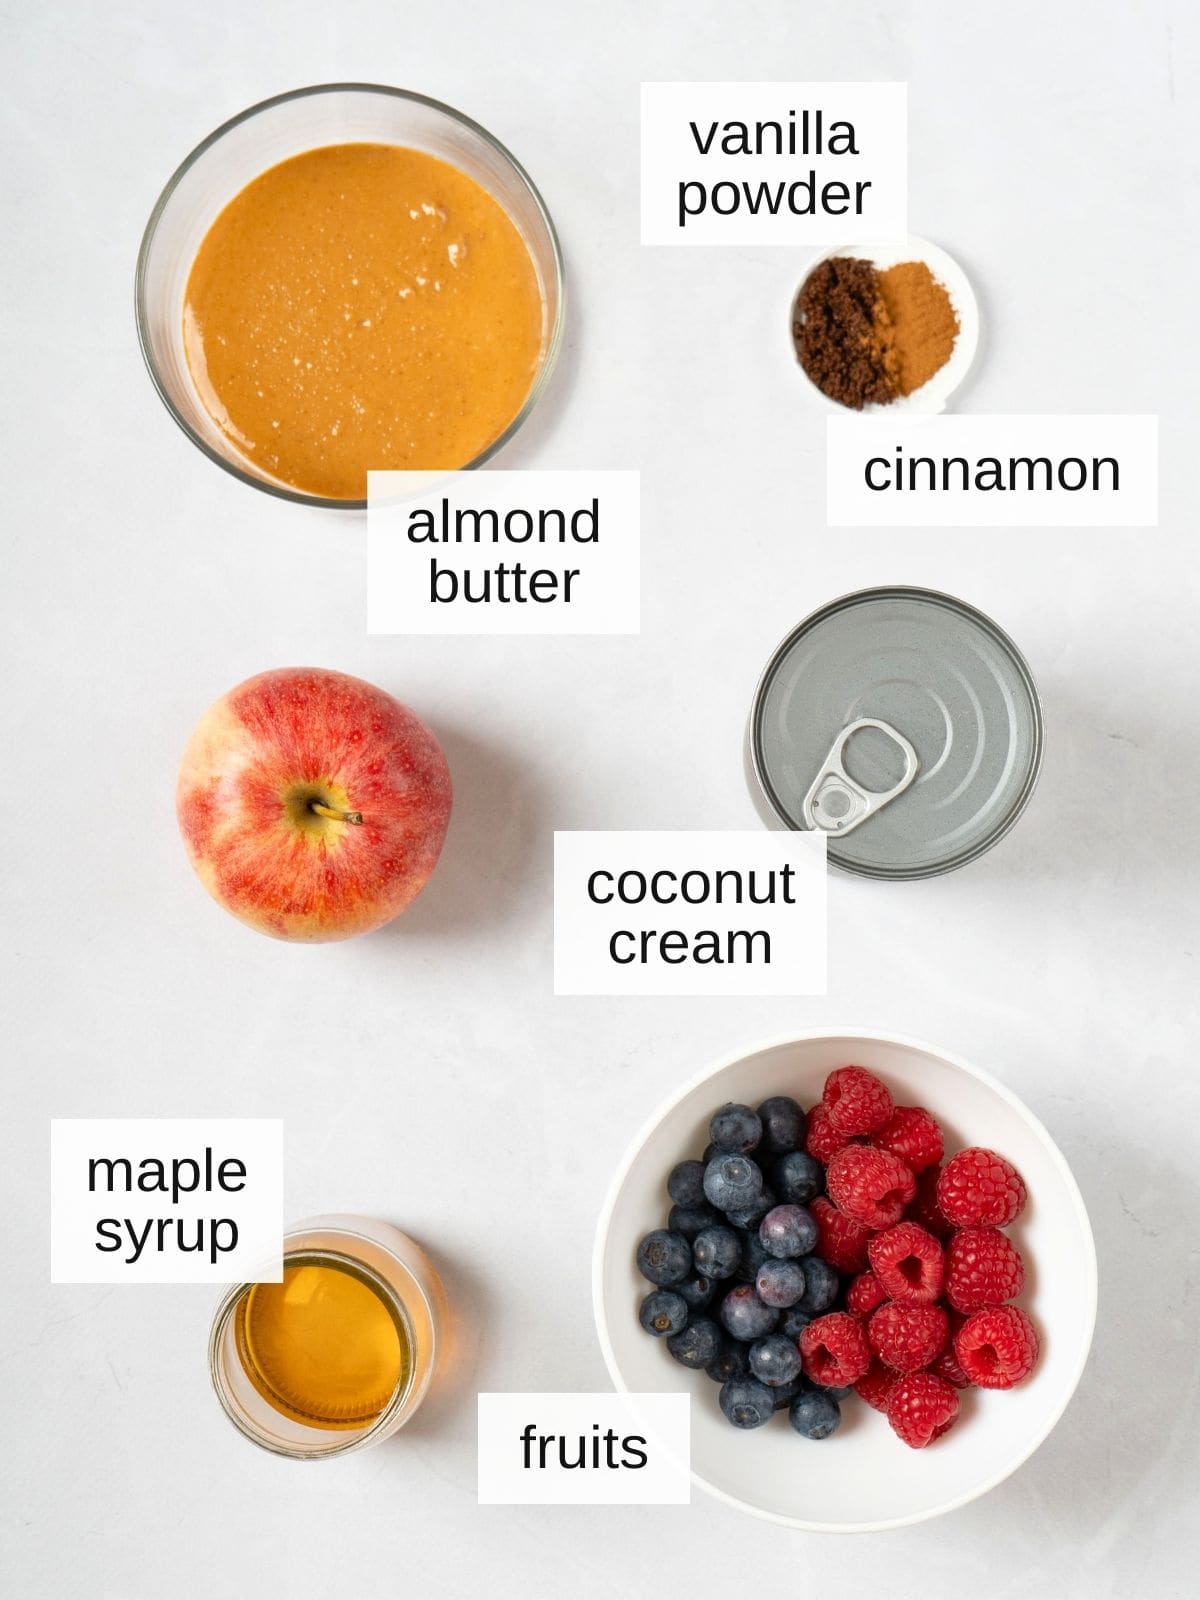 ingredients for vegan fruit dip, including almond butter, vanilla powder, cinnamon, coconut cream, maple syrup, and dippable fruits.